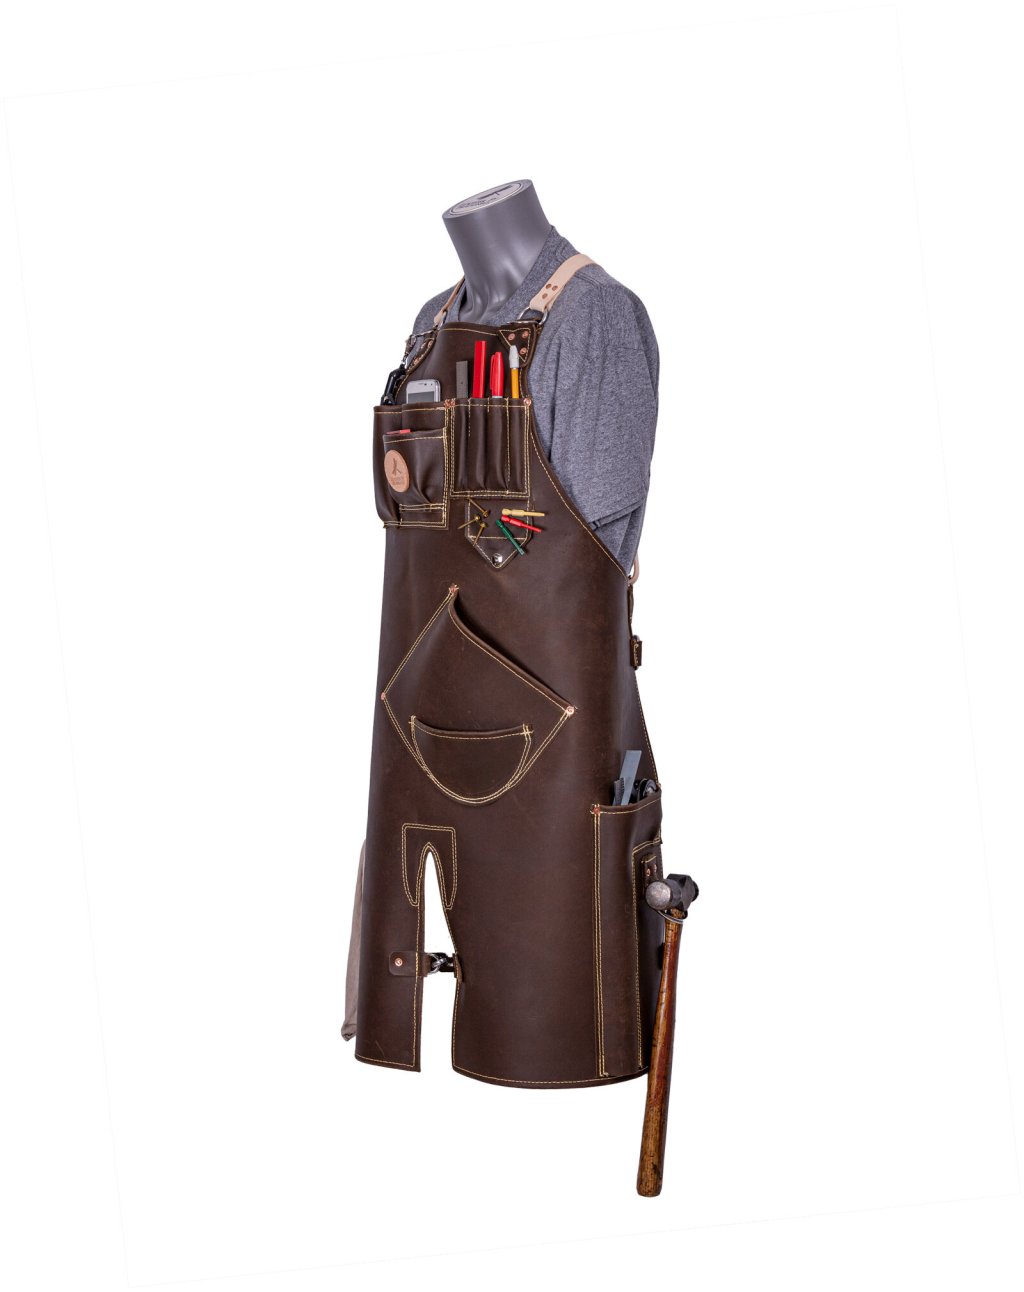 “Forge Your Style: The Evolution of Blacksmithing Aprons”